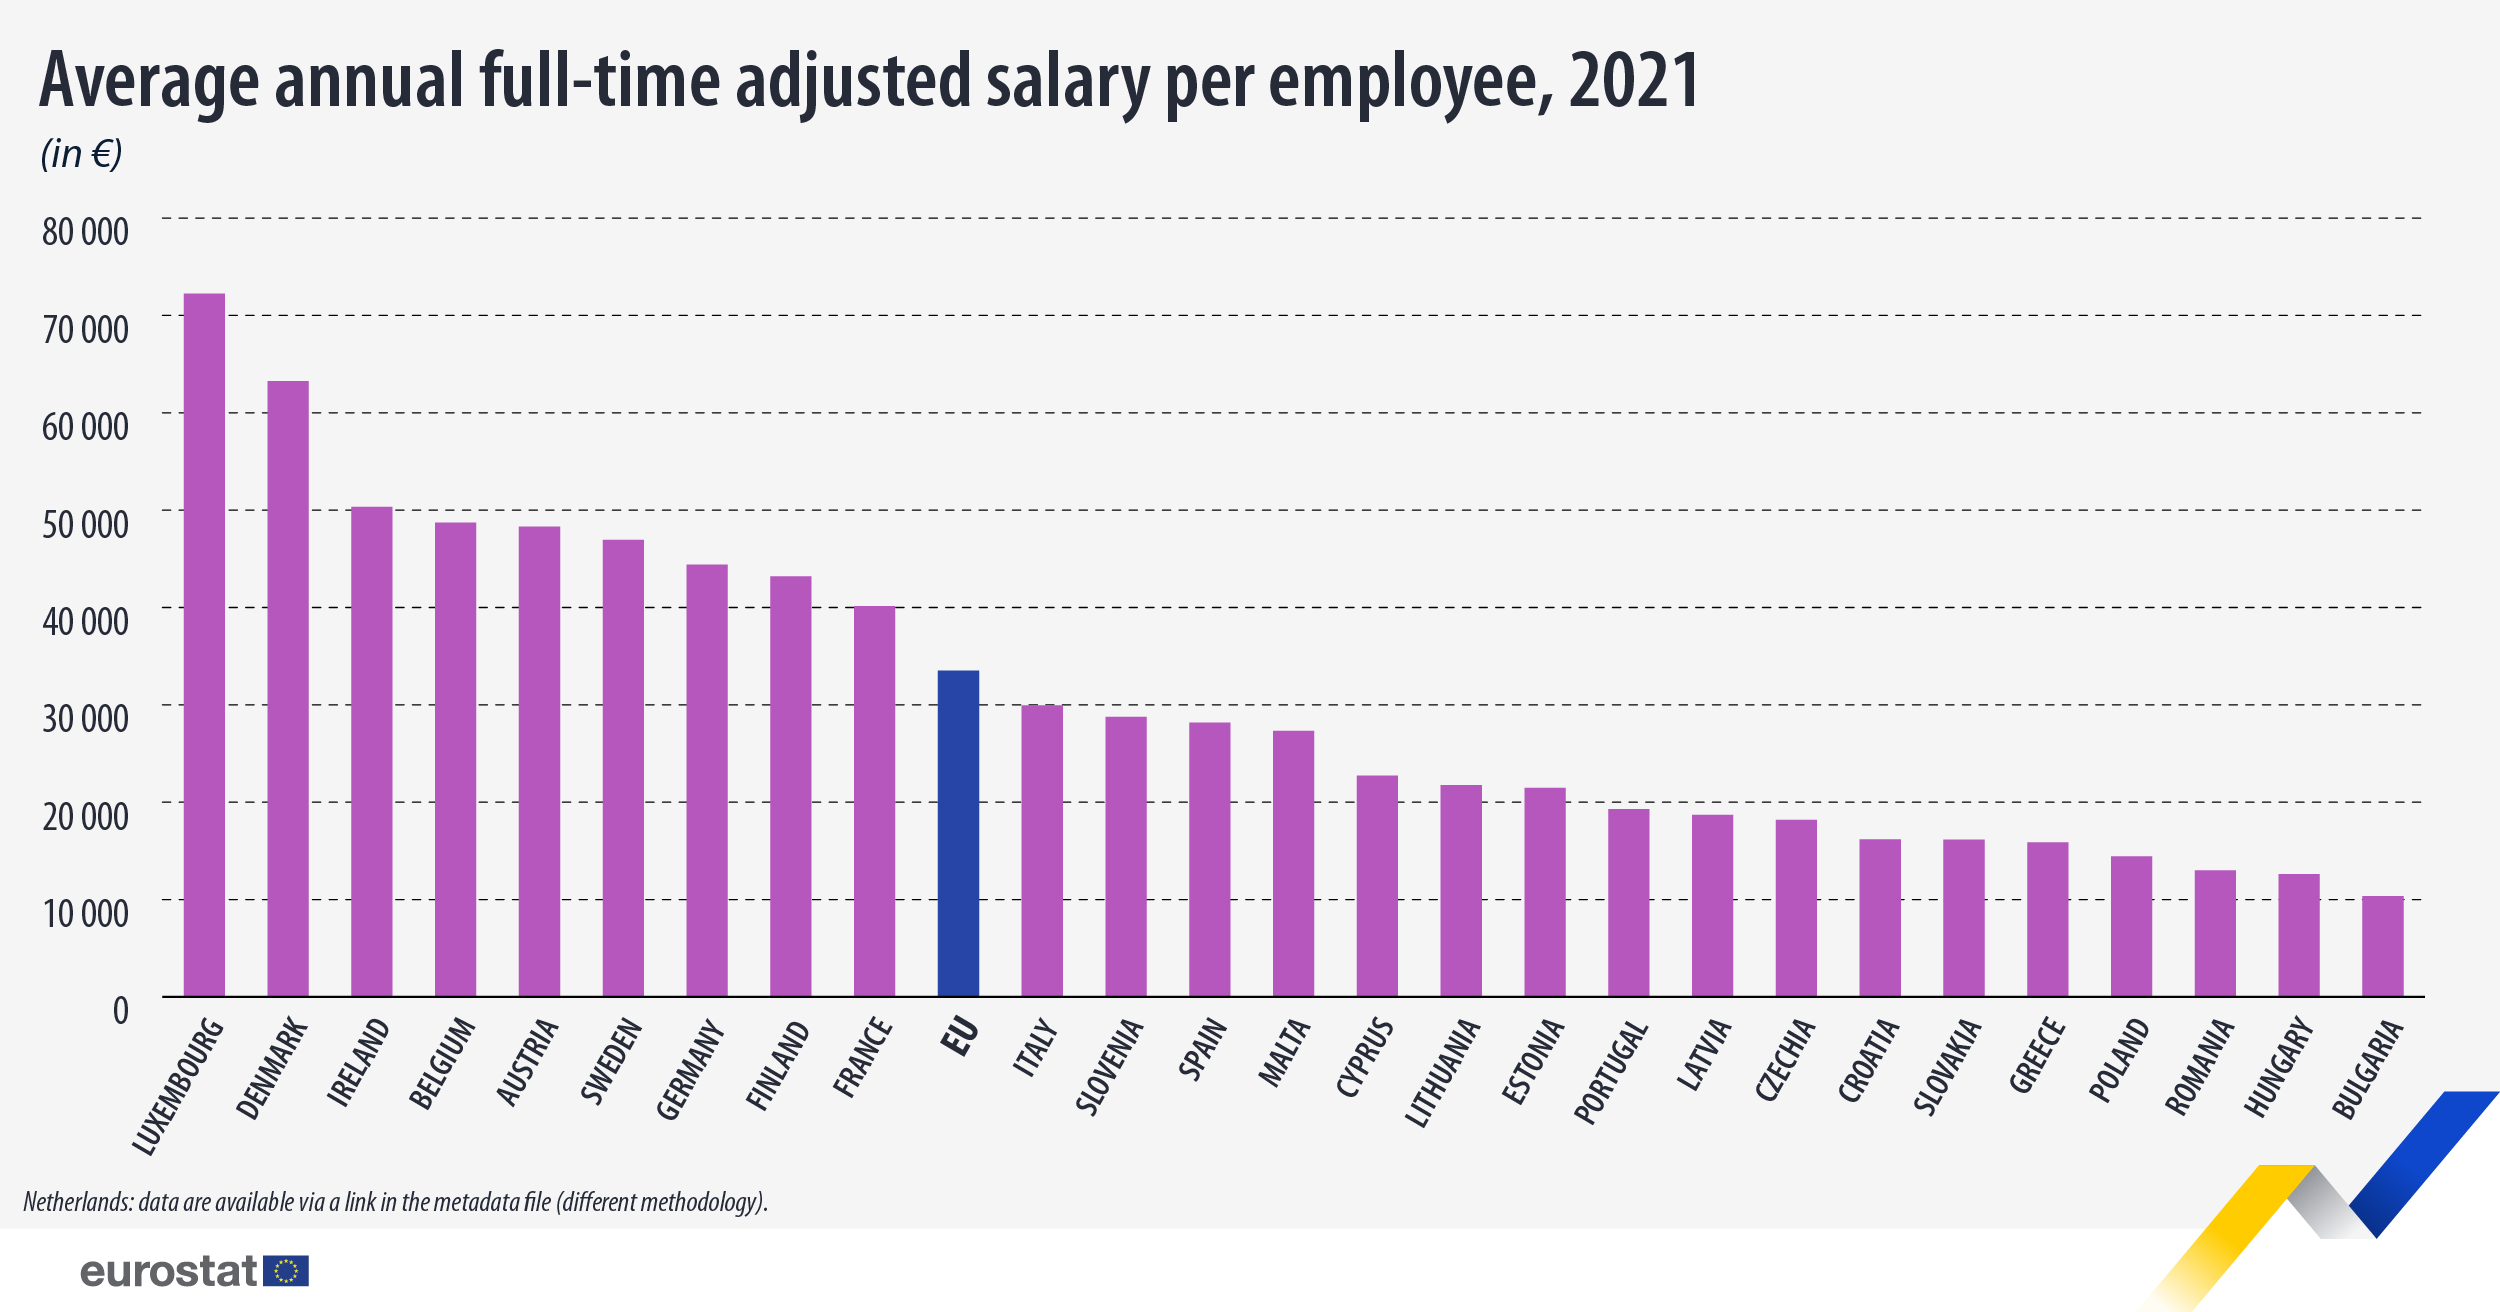 Bar graph: Average annual full-time adjusted salary per employee in 2021, in €, in the EU Member States